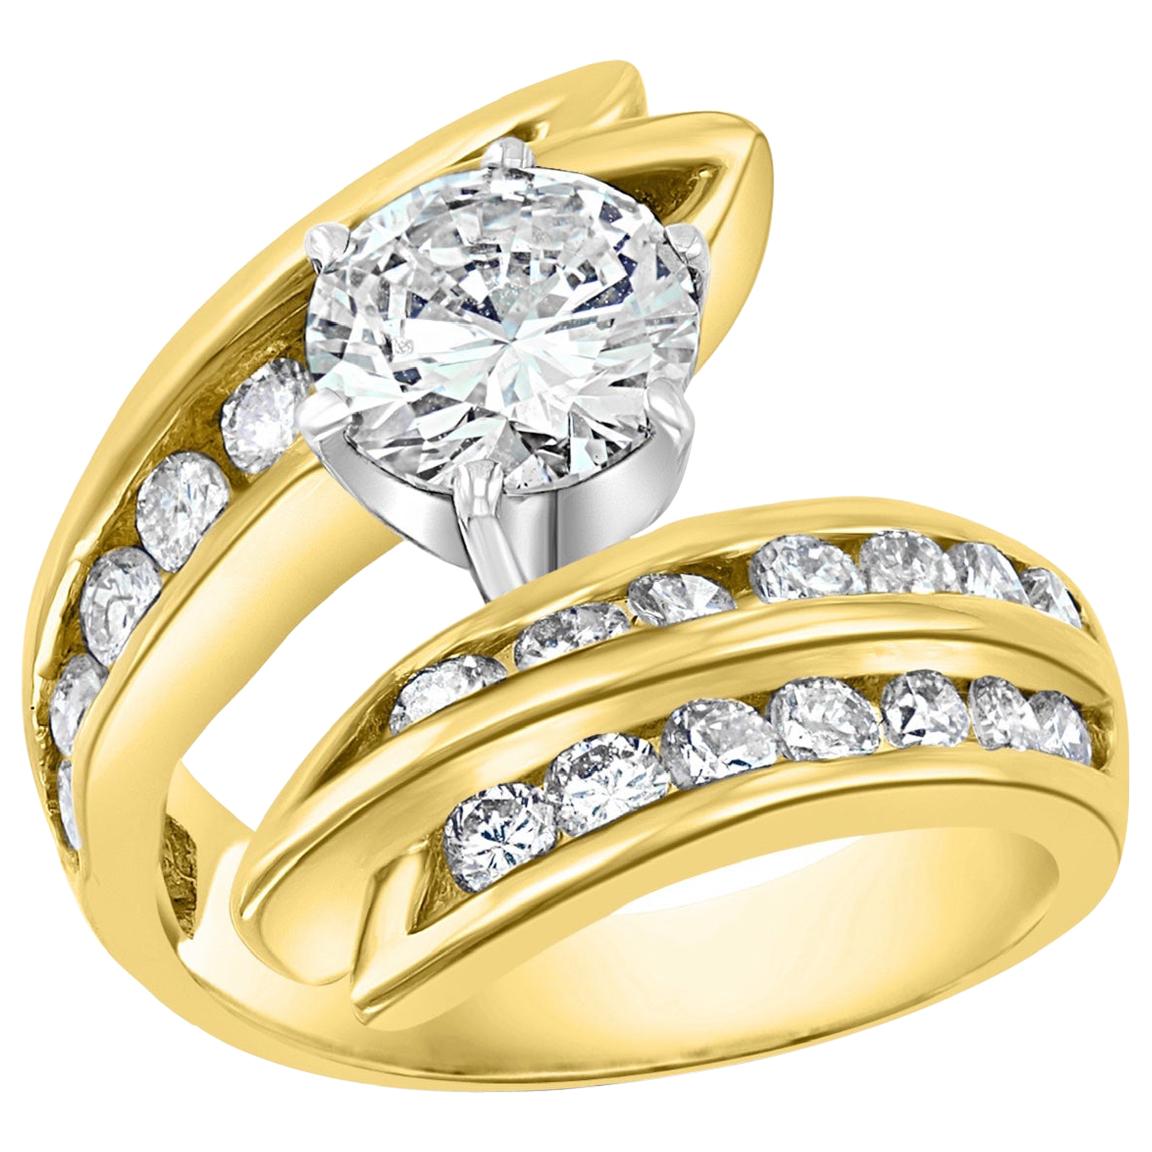 1.5 Carat Solitaire Round Shape 2.5 Total Diamond Engagement 14 Yellow Gold Ring